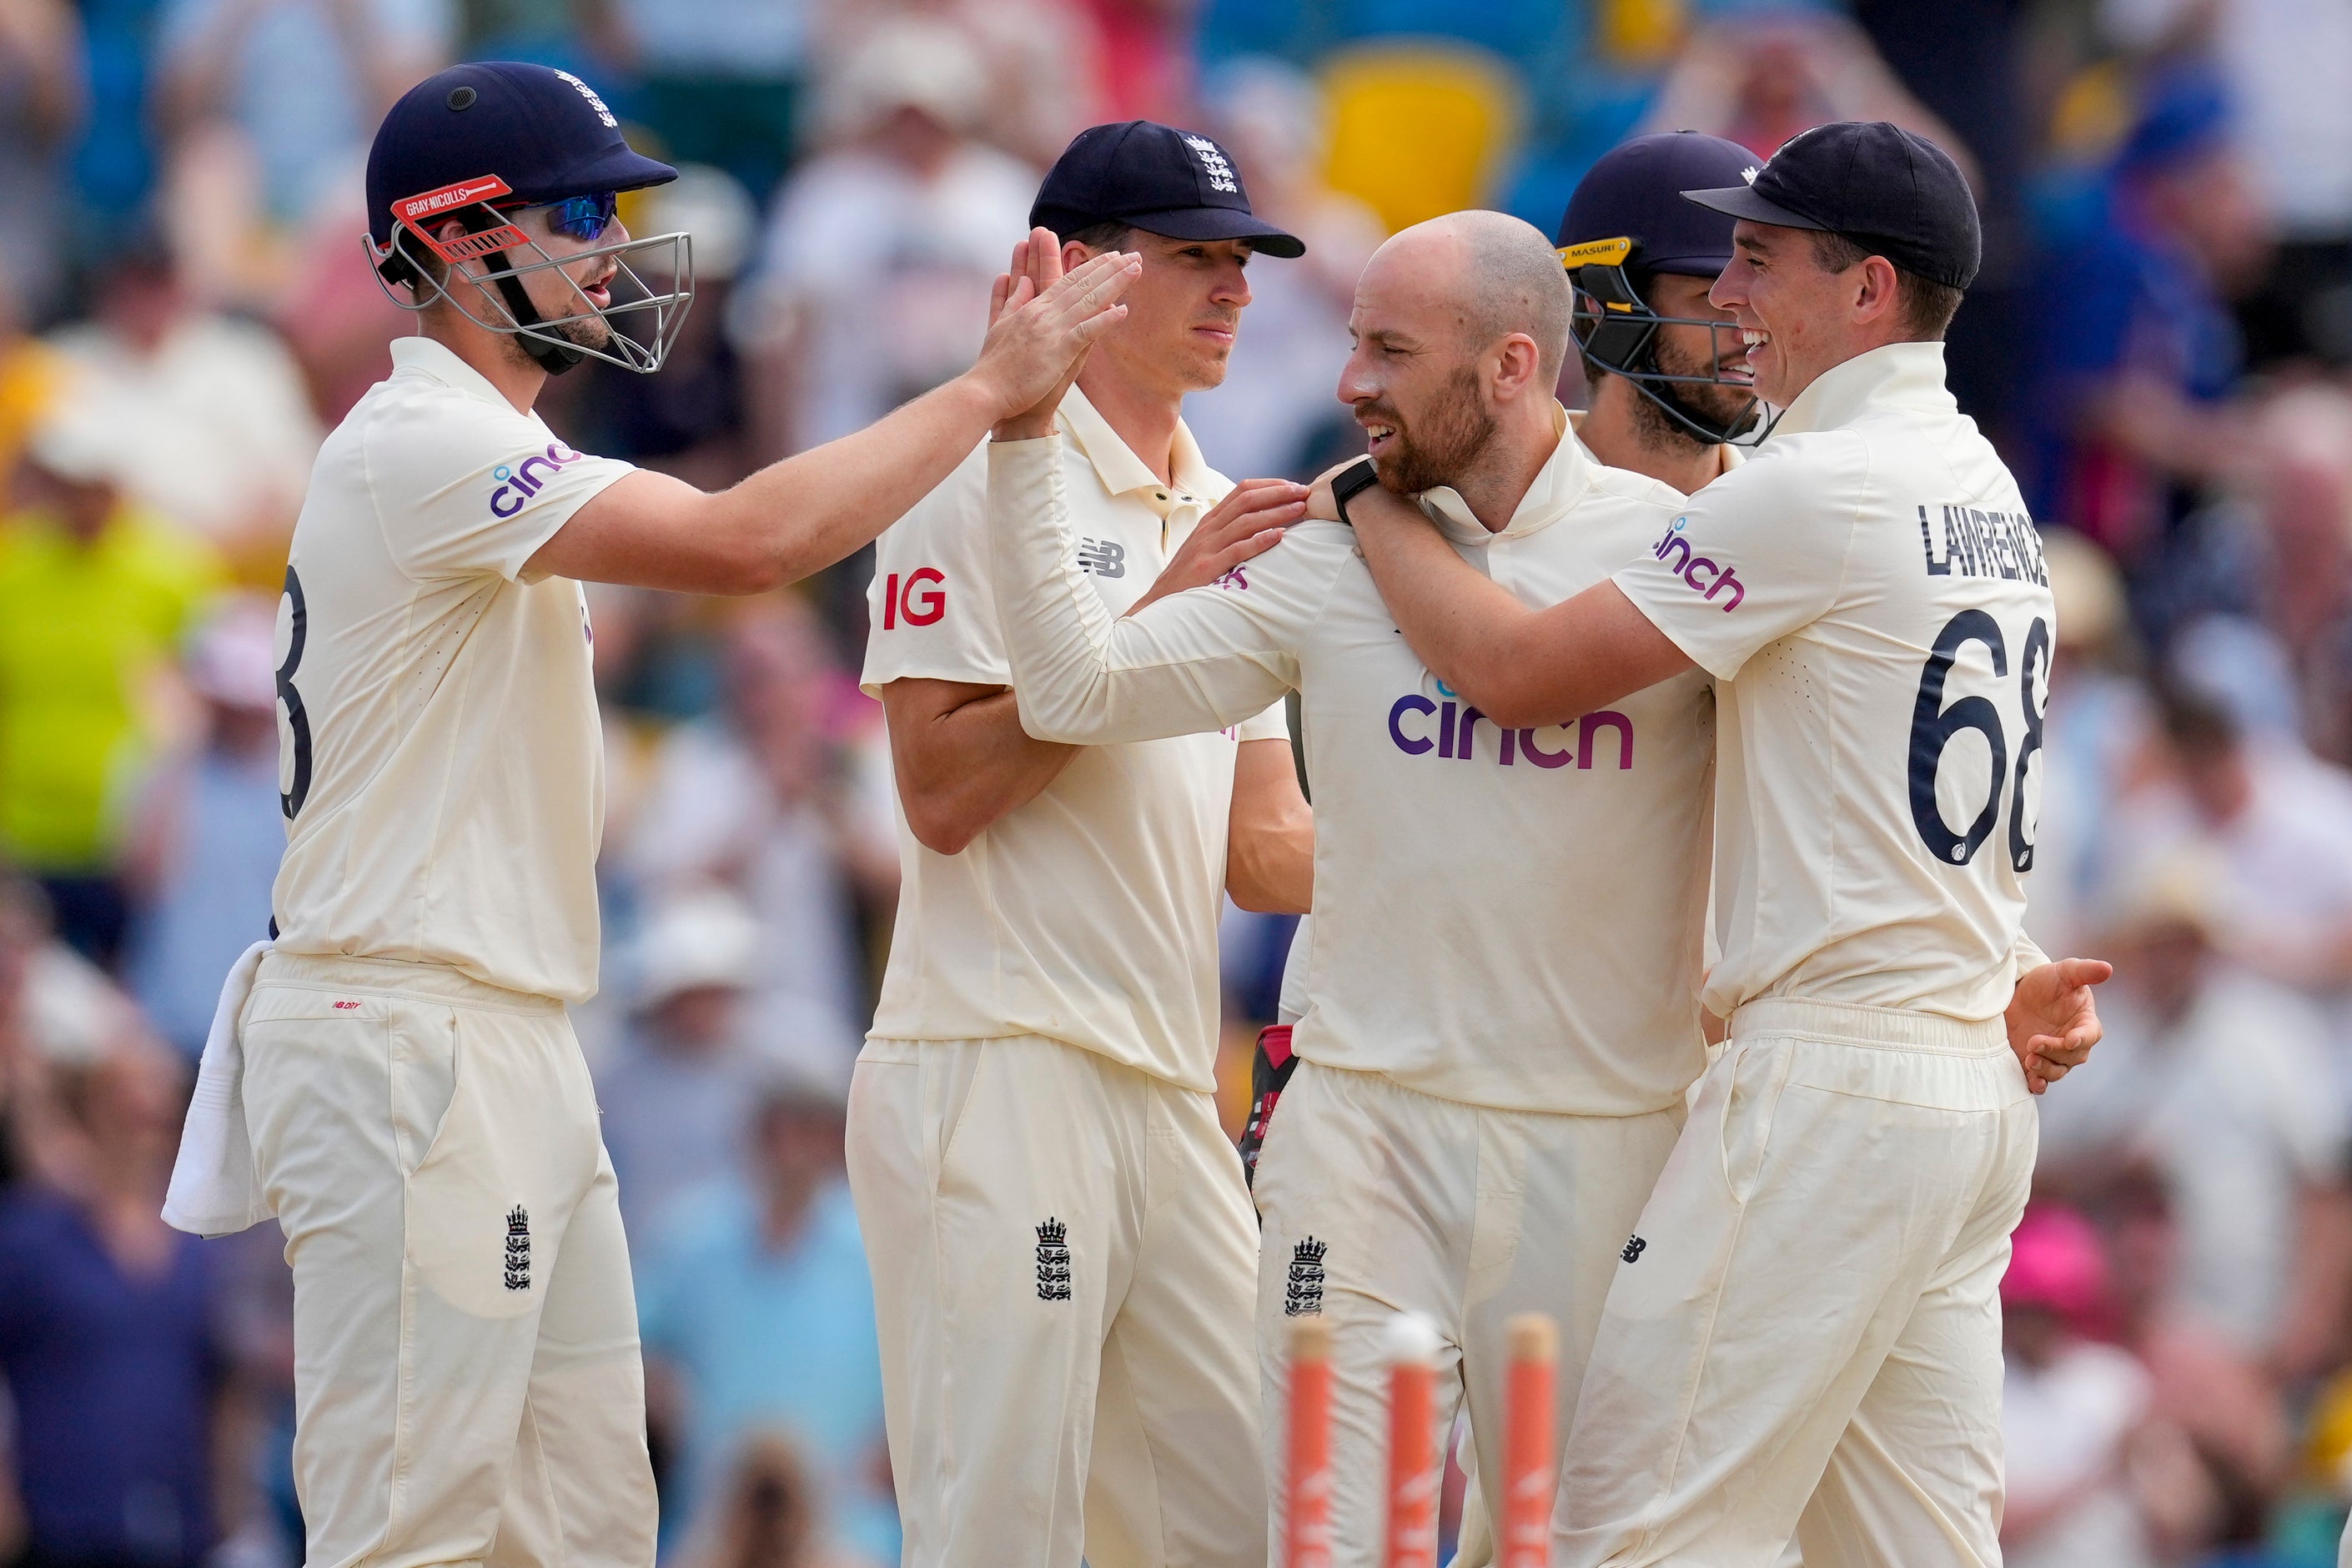 Jack Leach eventually earned some reward after toiling away for 69.5 overs in West Indies’ first innings